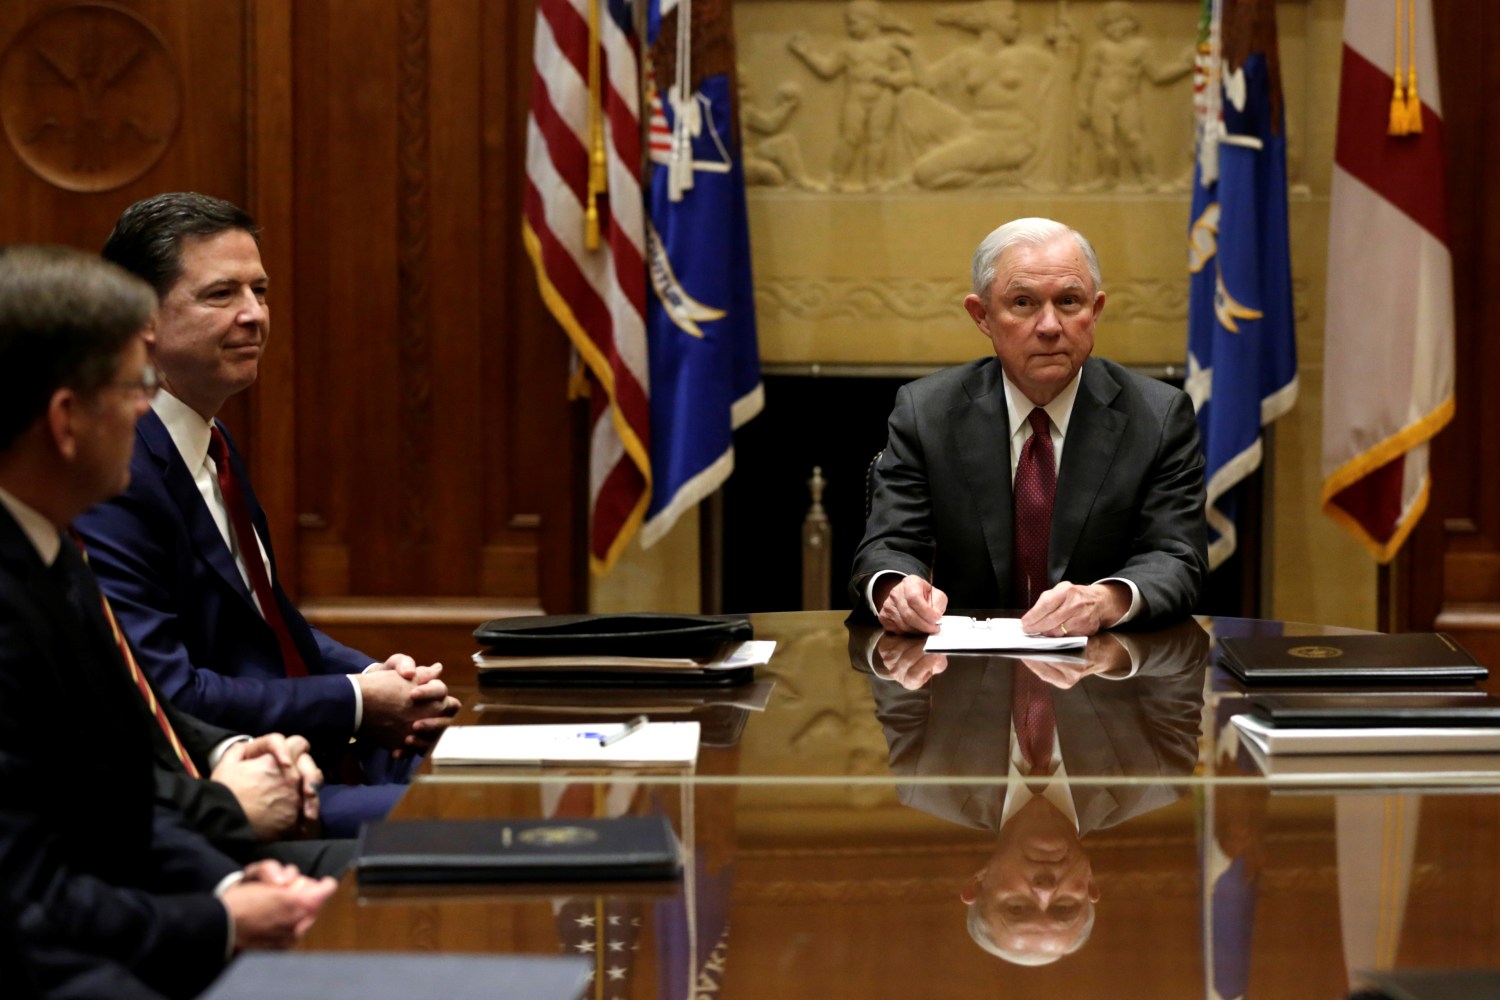 Jeff Sessions sitting a table with Comey